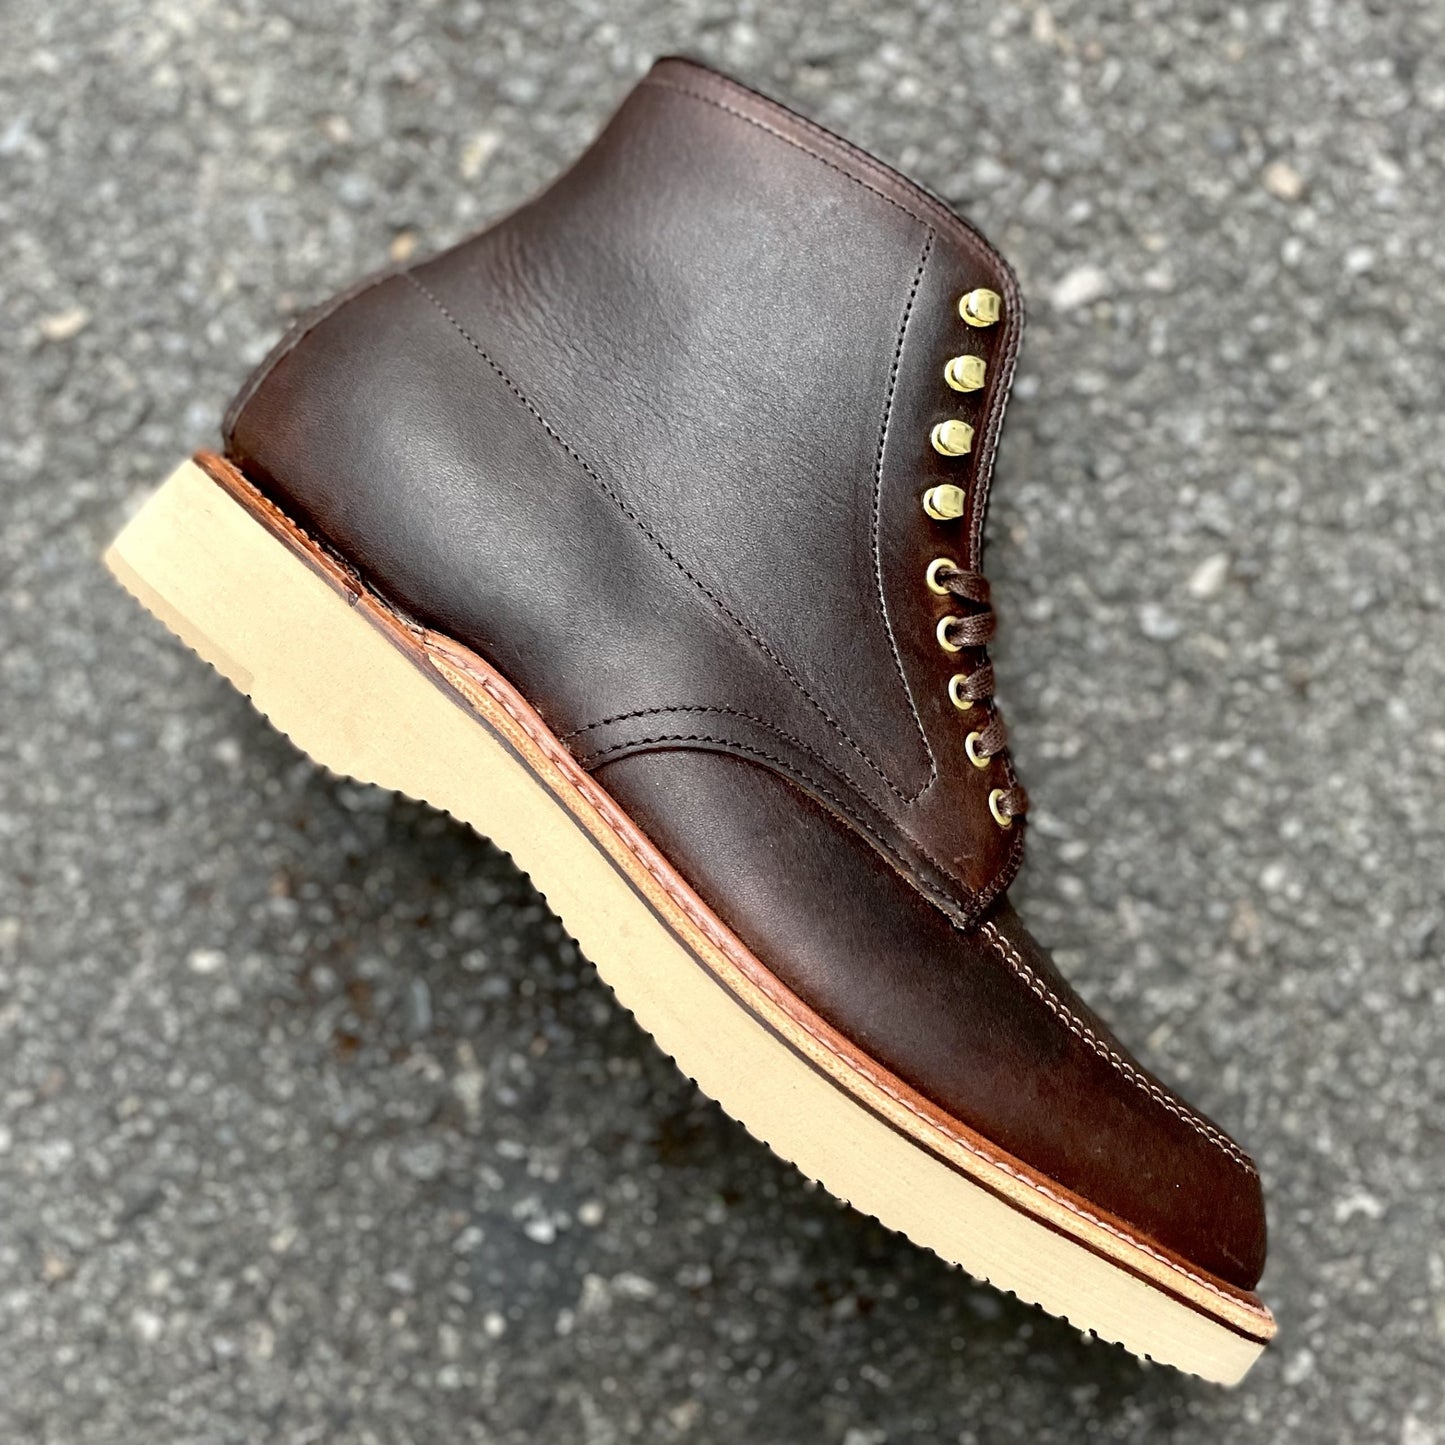 D1926H - Porter Indy Boot in Kudu Leather (Deposit)